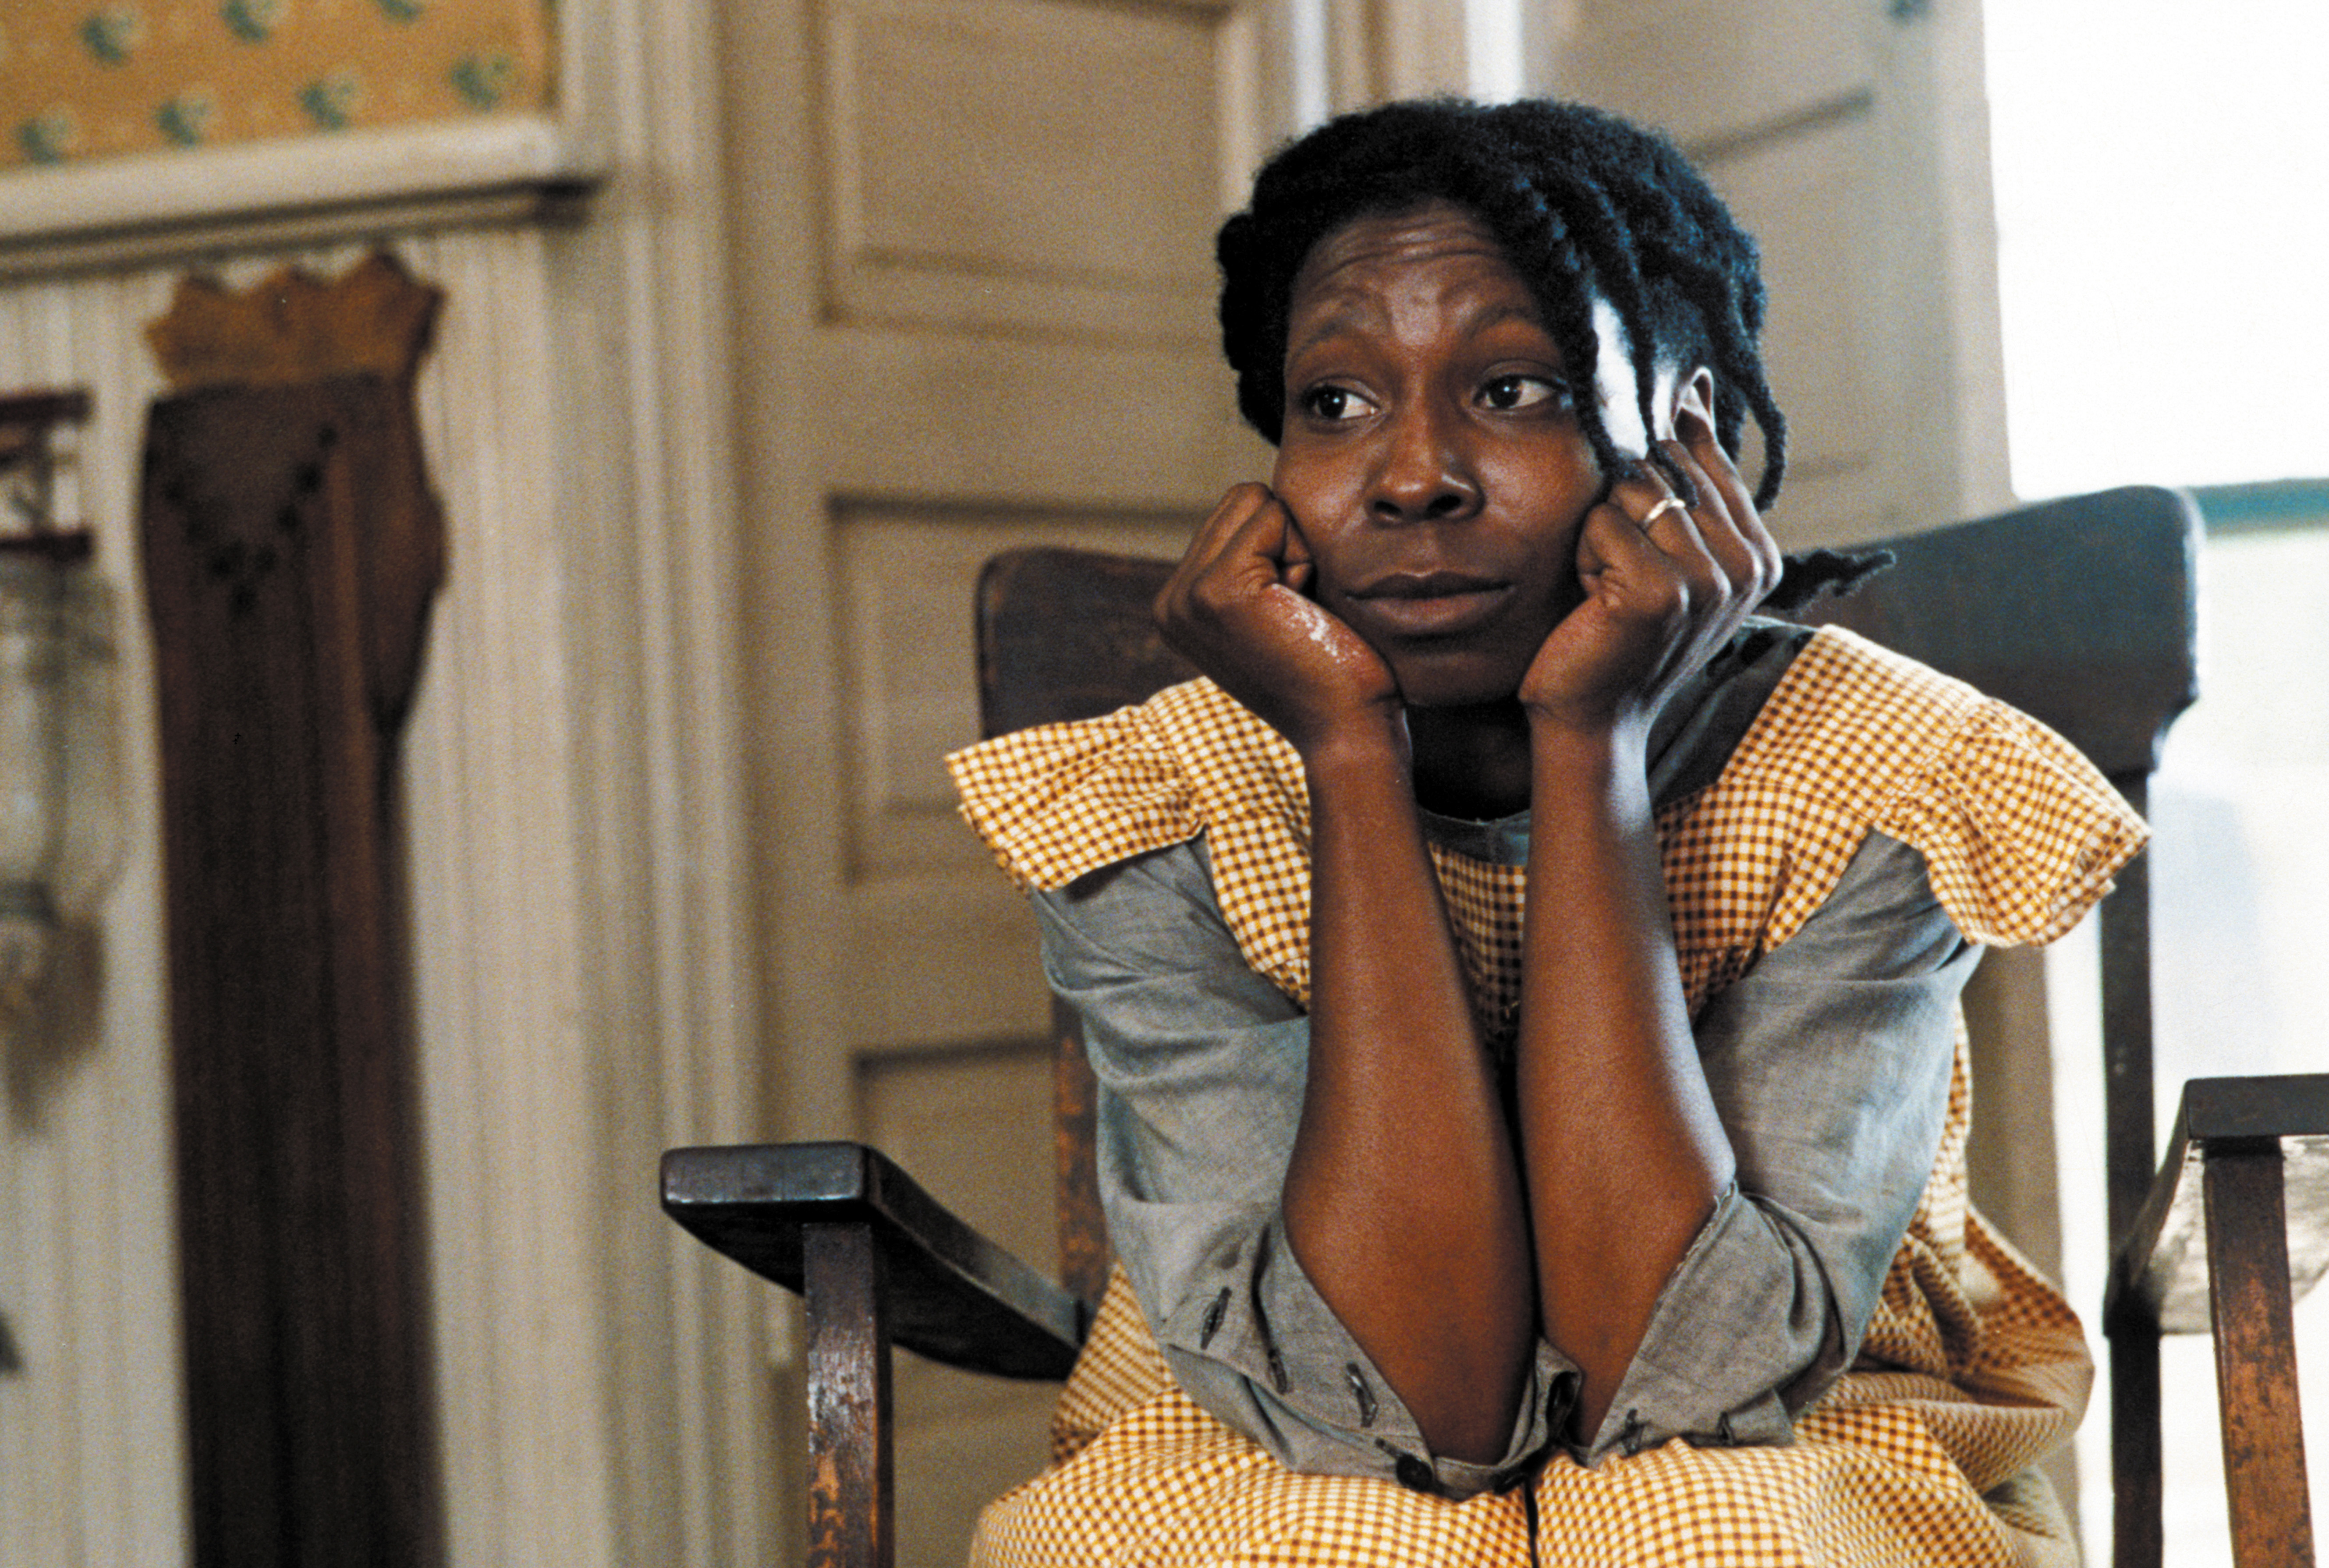 Whoopi Goldberg on the set of "The Color Purple" in 1985 | Source: Getty Images